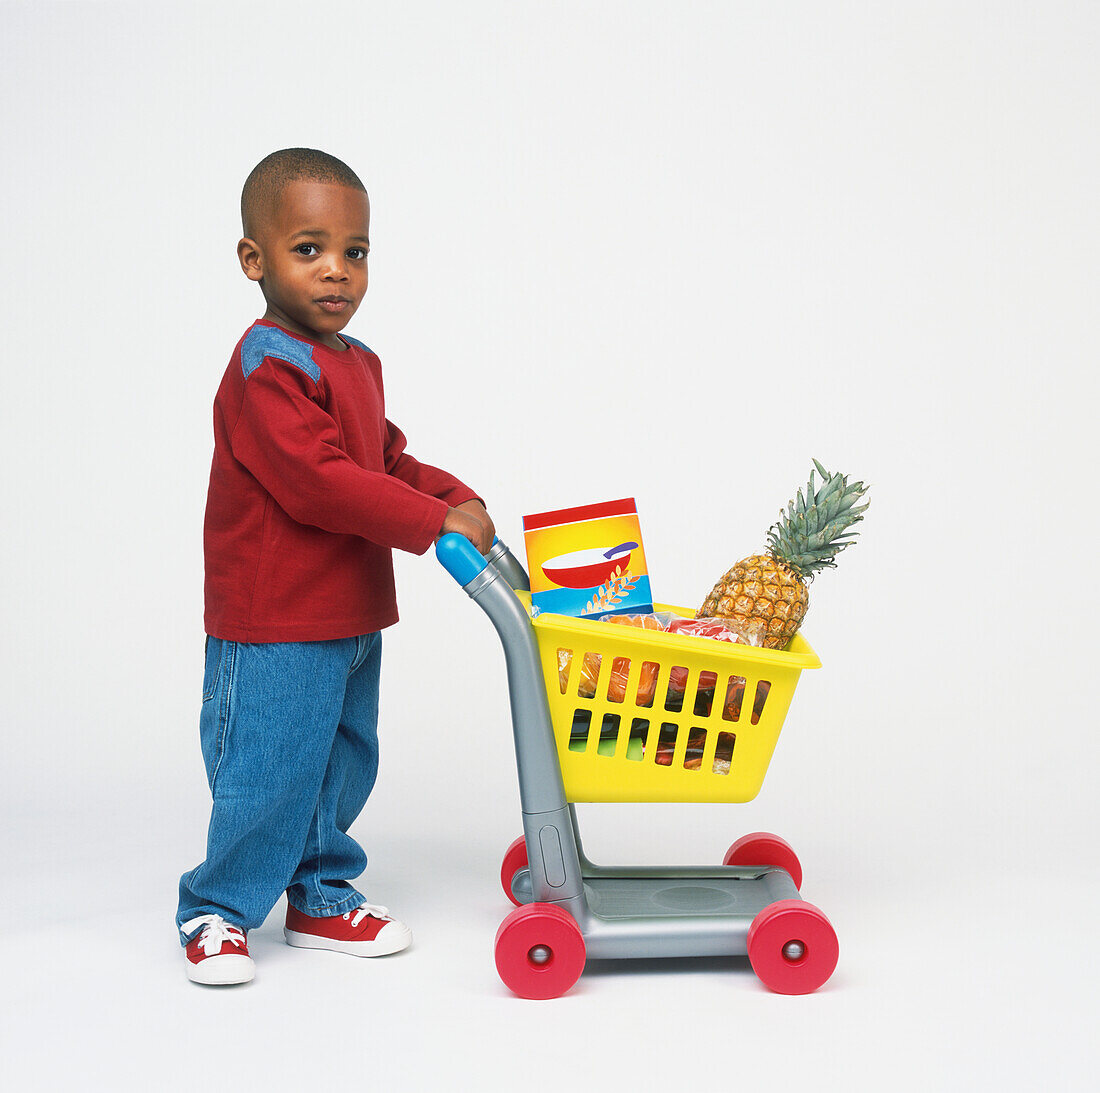 Child pushing a toy shopping trolley